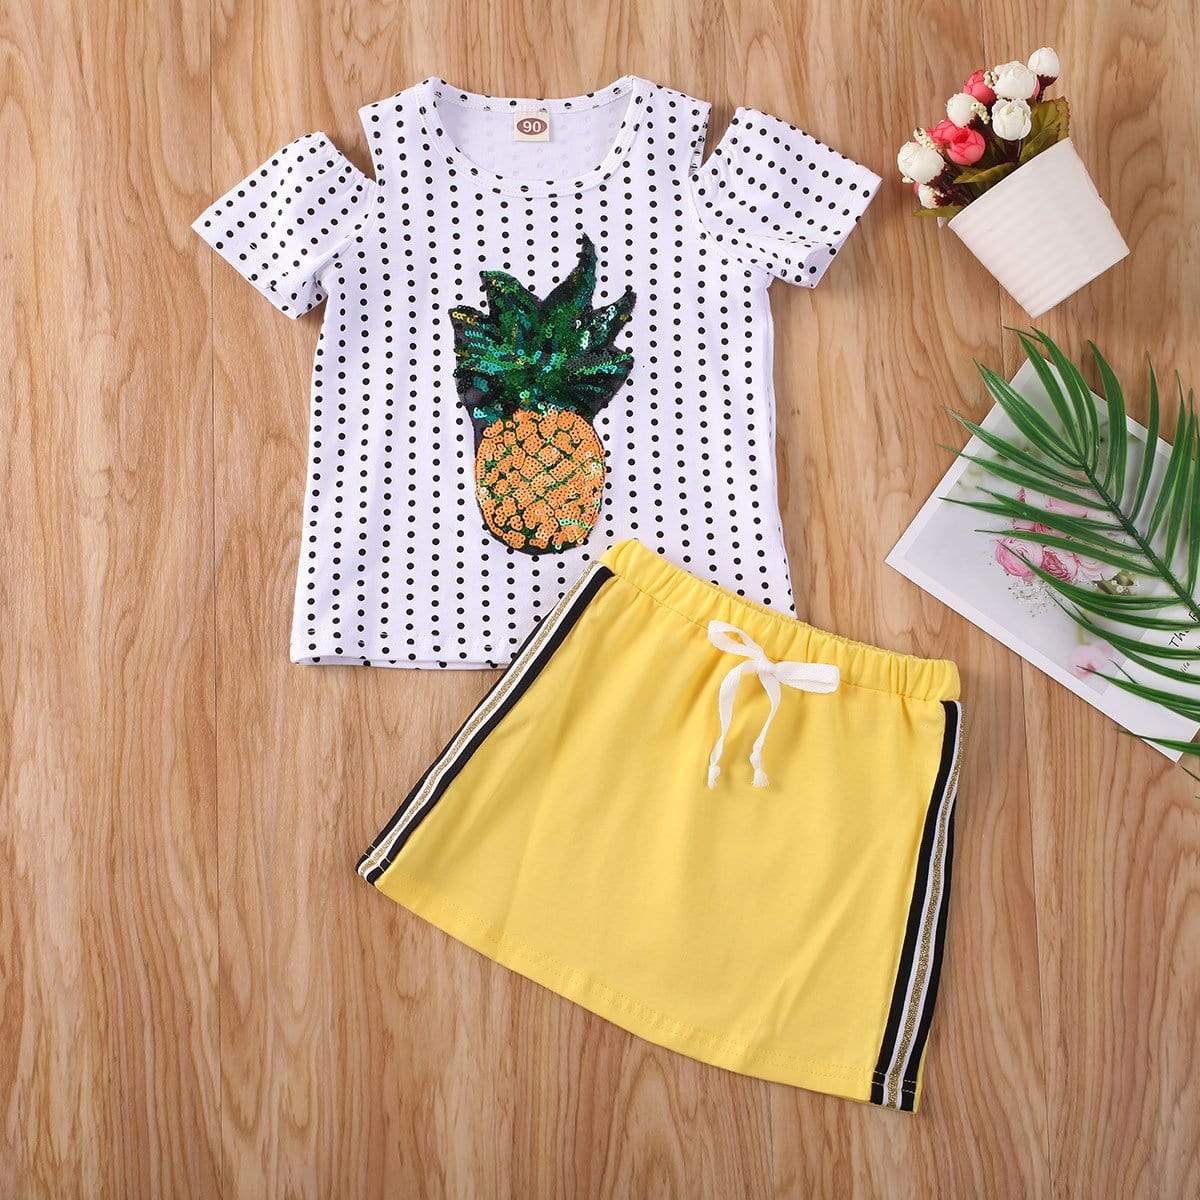 NEW Sequin Pineapple Short Sleeve Shirt & Shorts Girls Outfit Set 2T 3T 4T  5T 6